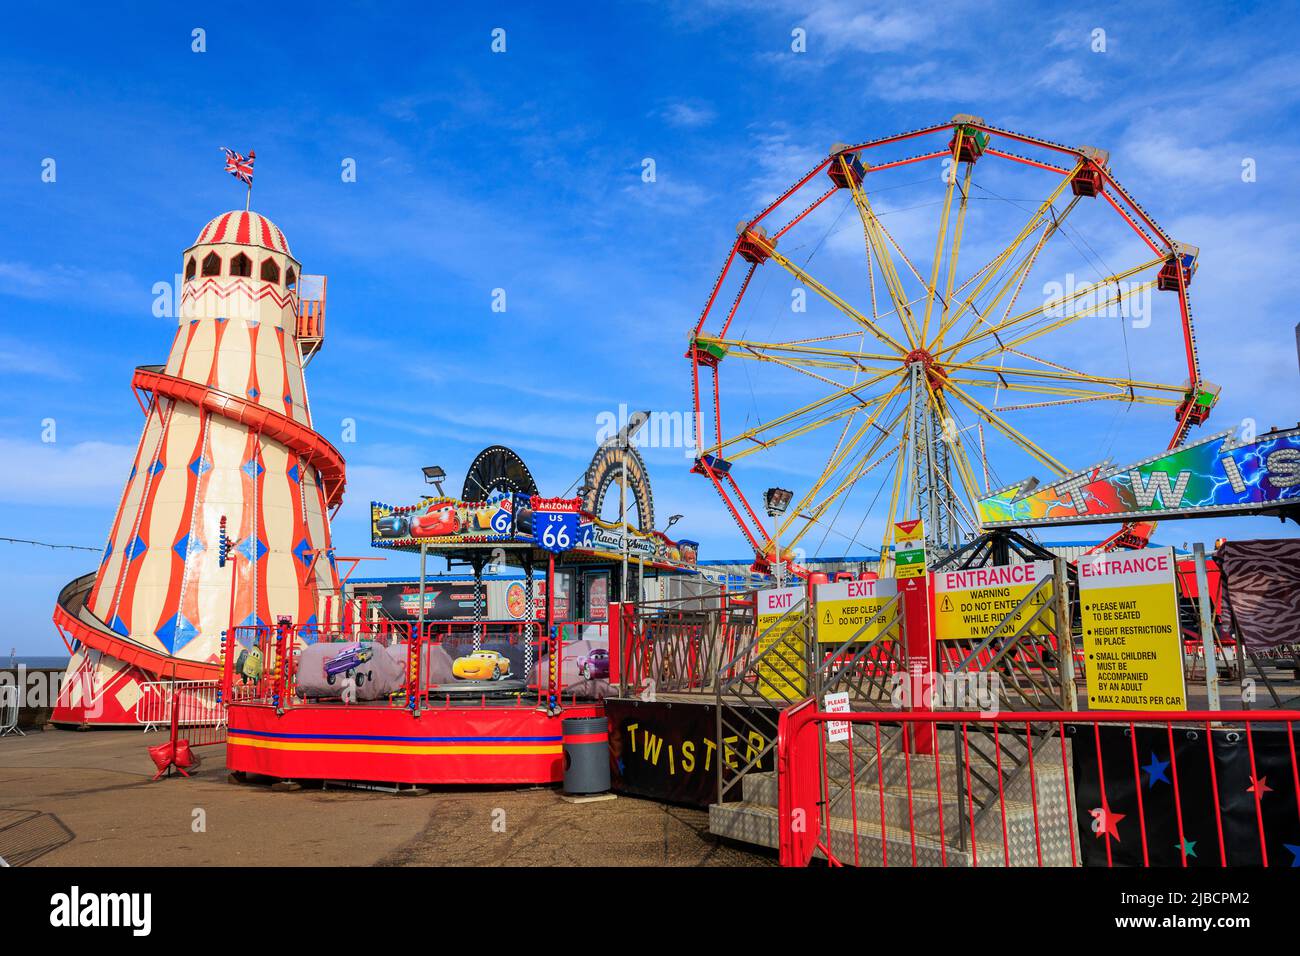 The fun fair at Hunstanton on the north coast of Norfolk on a clear winter's day. Closed for winter maintainance. Stock Photo